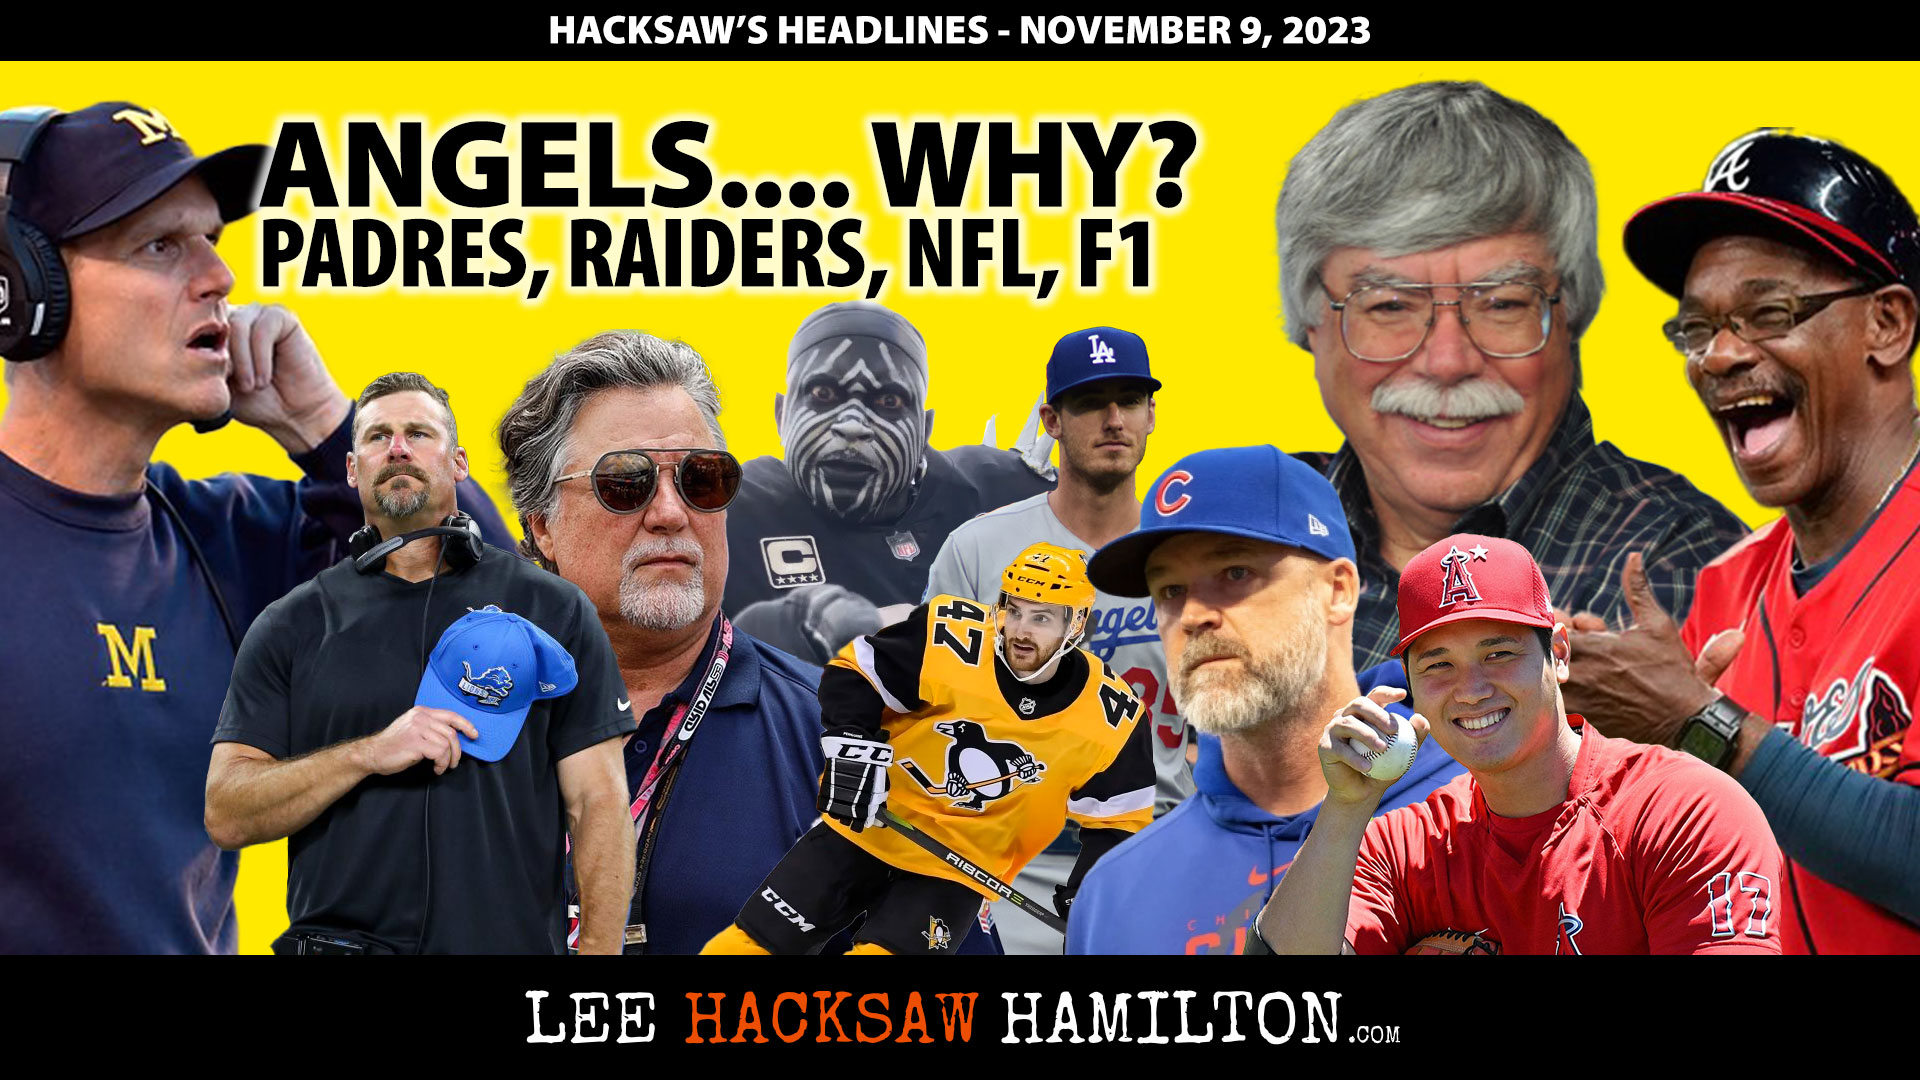 Lee Hacksaw Hamilton discusses Angels, Padres, MLB Free Agents, Chargers, Raiders, 49ers, Michigan, USC, NHL, F1